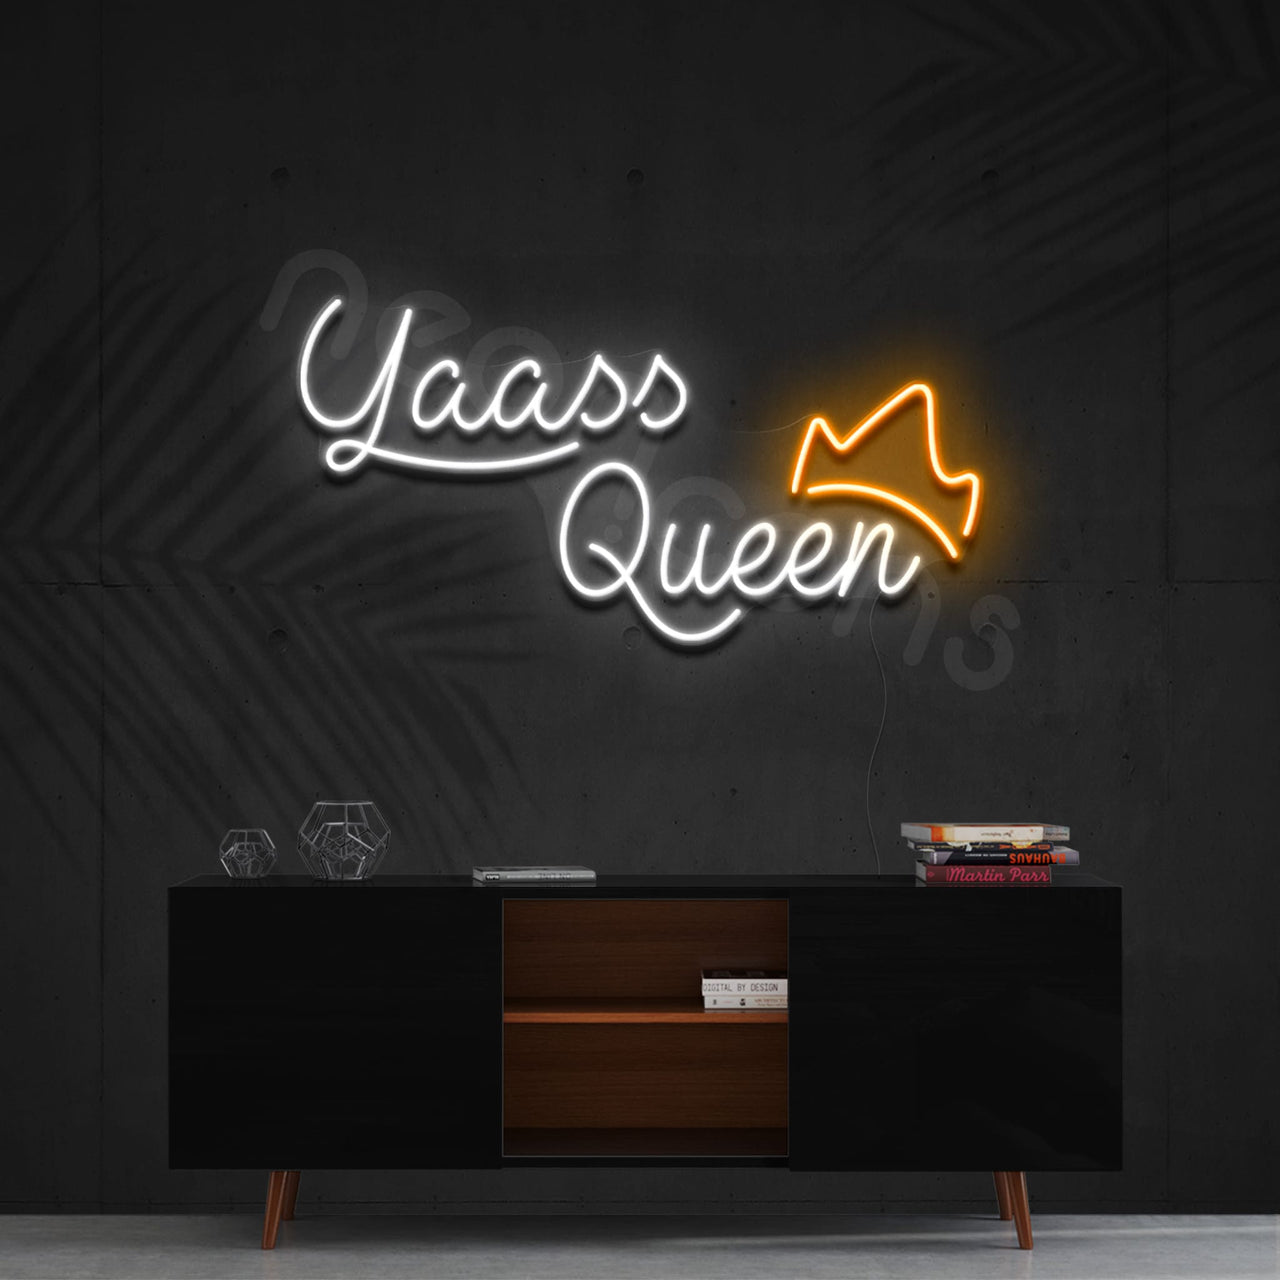 "Yaass Queen" Neon Sign 60cm (2ft) / Orange / LED by Neon Icons